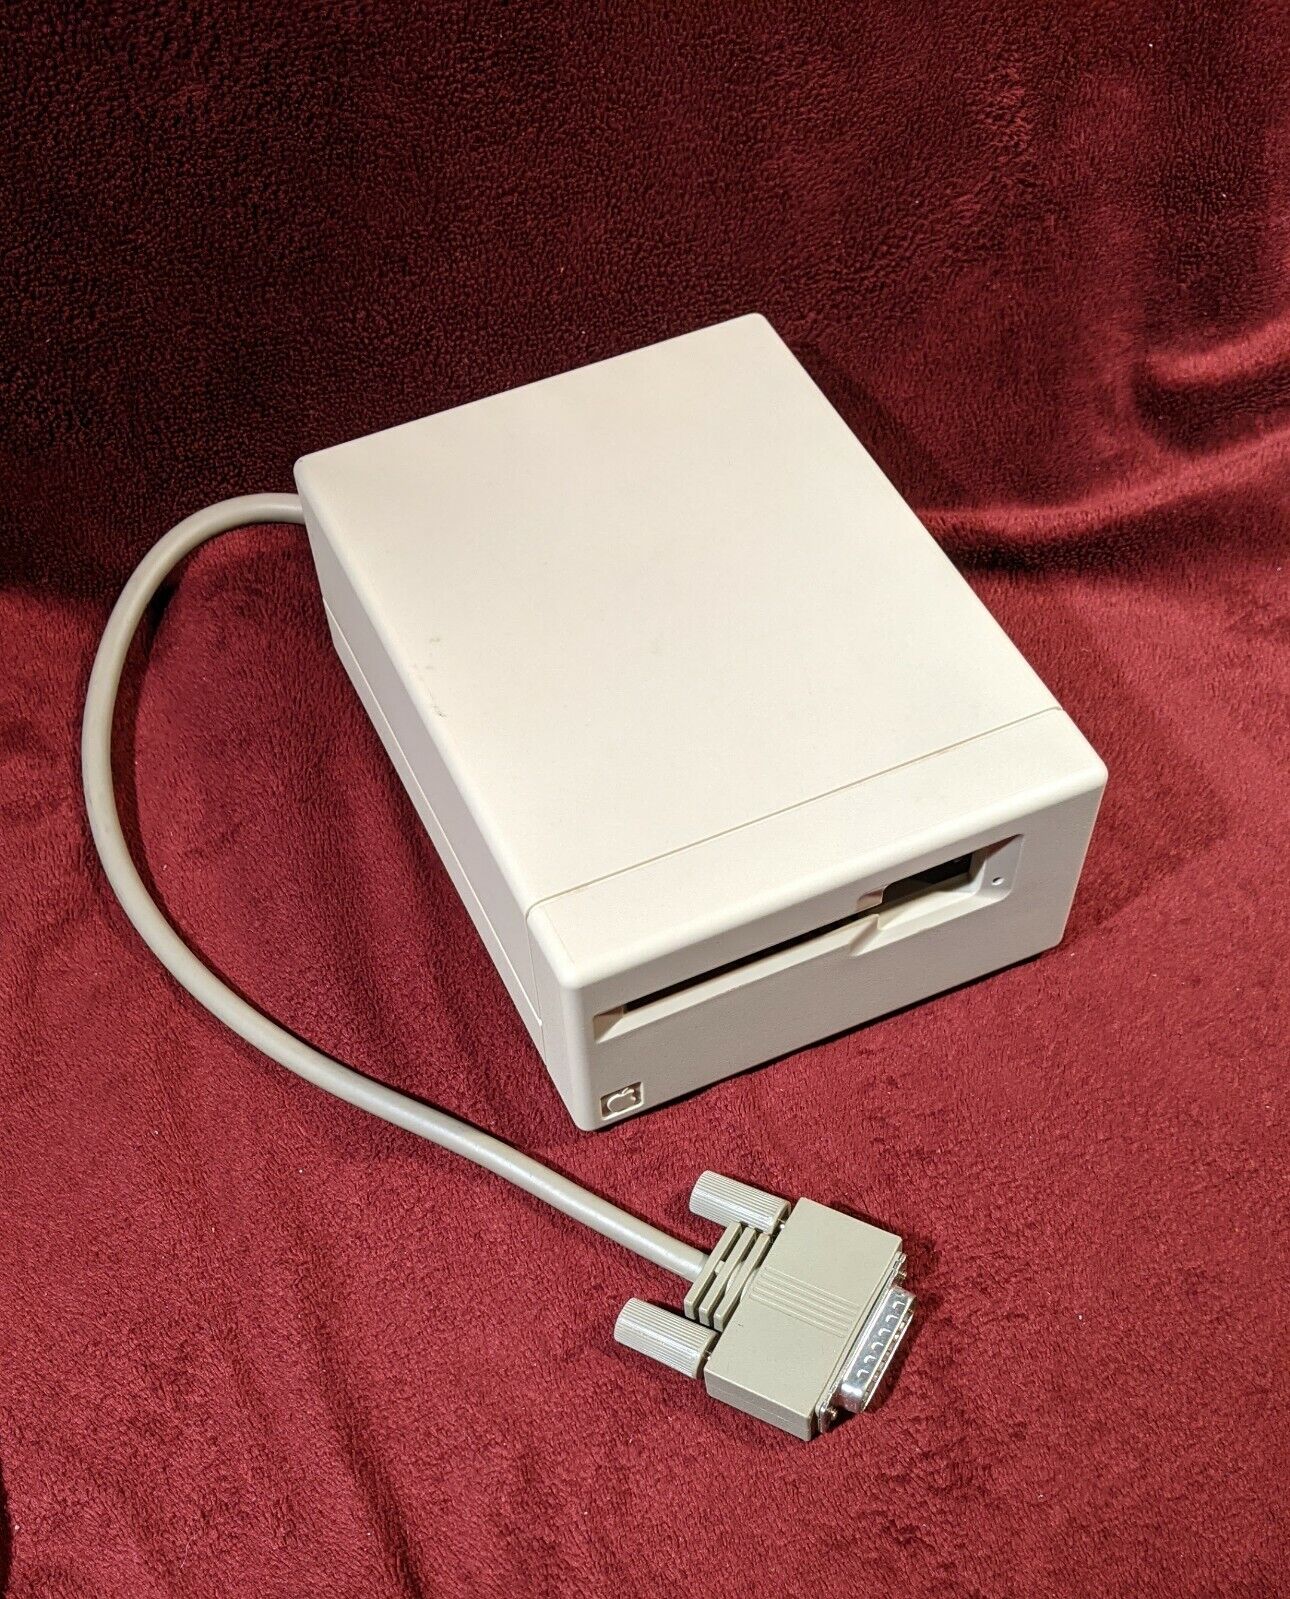 Vintage Apple Macintosh #M0130 External 400k Floppy Disk Drive- loads and ejects